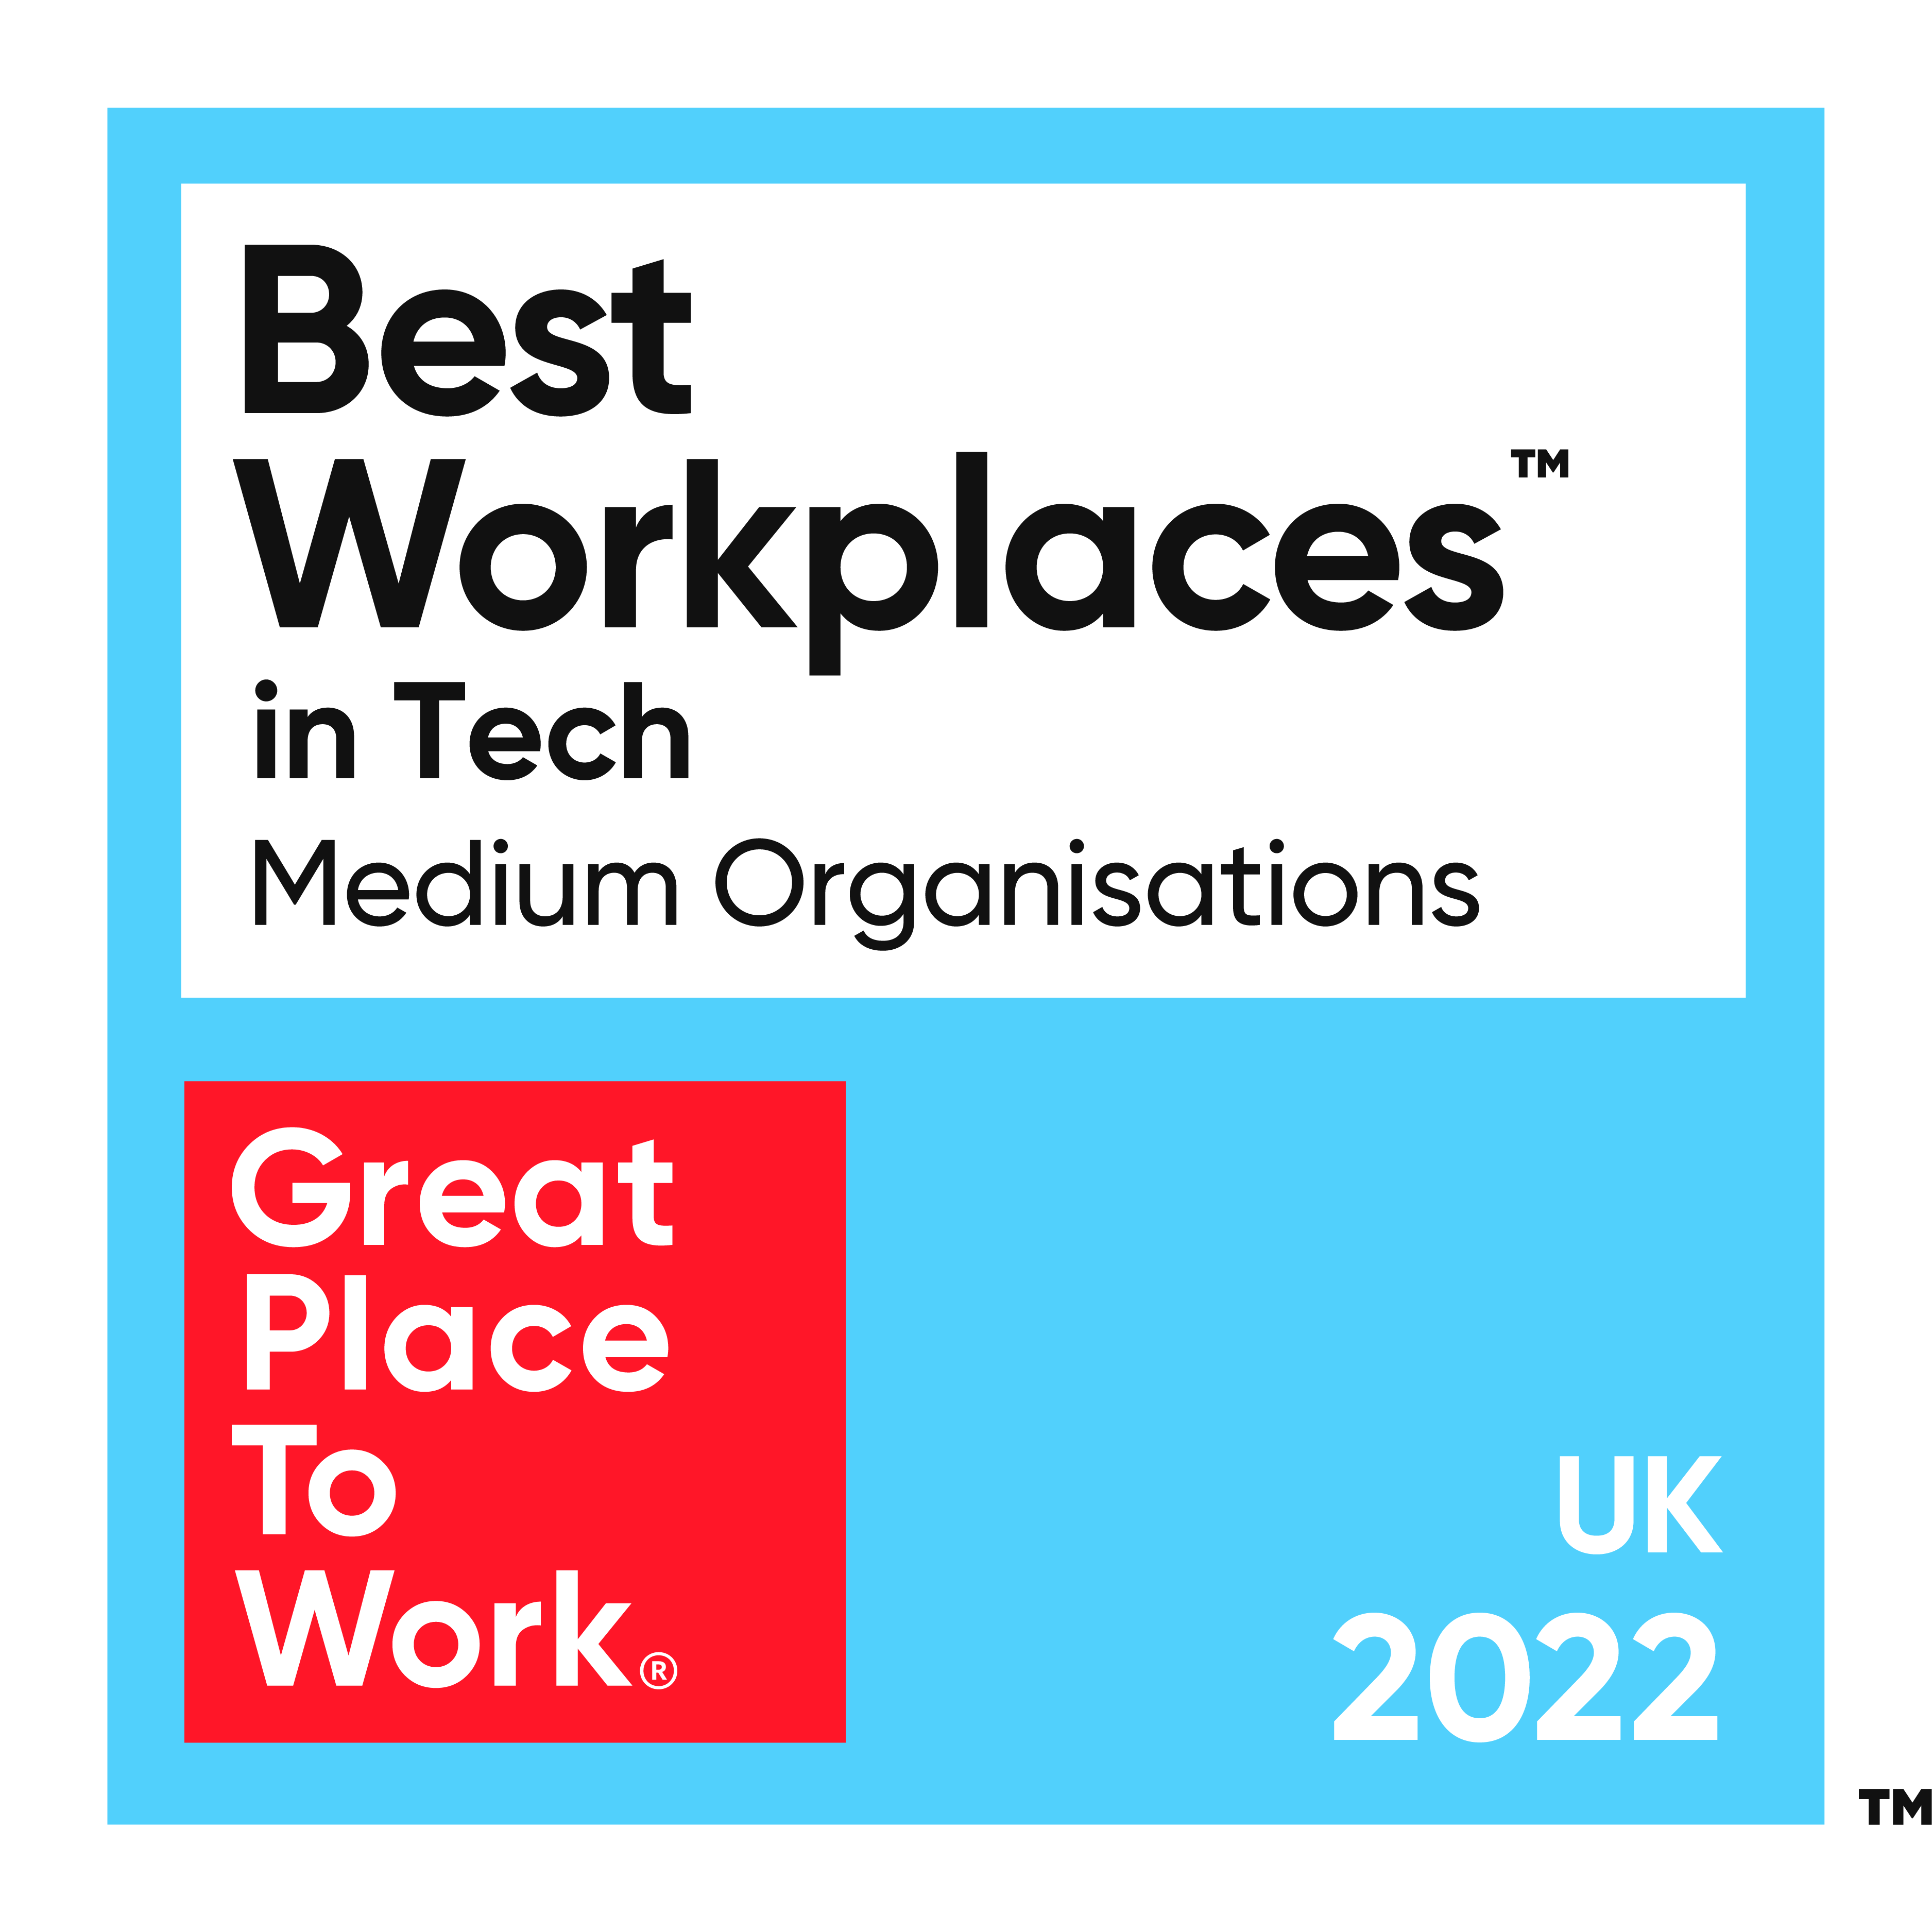 Best Workplaces For Tech in the UK